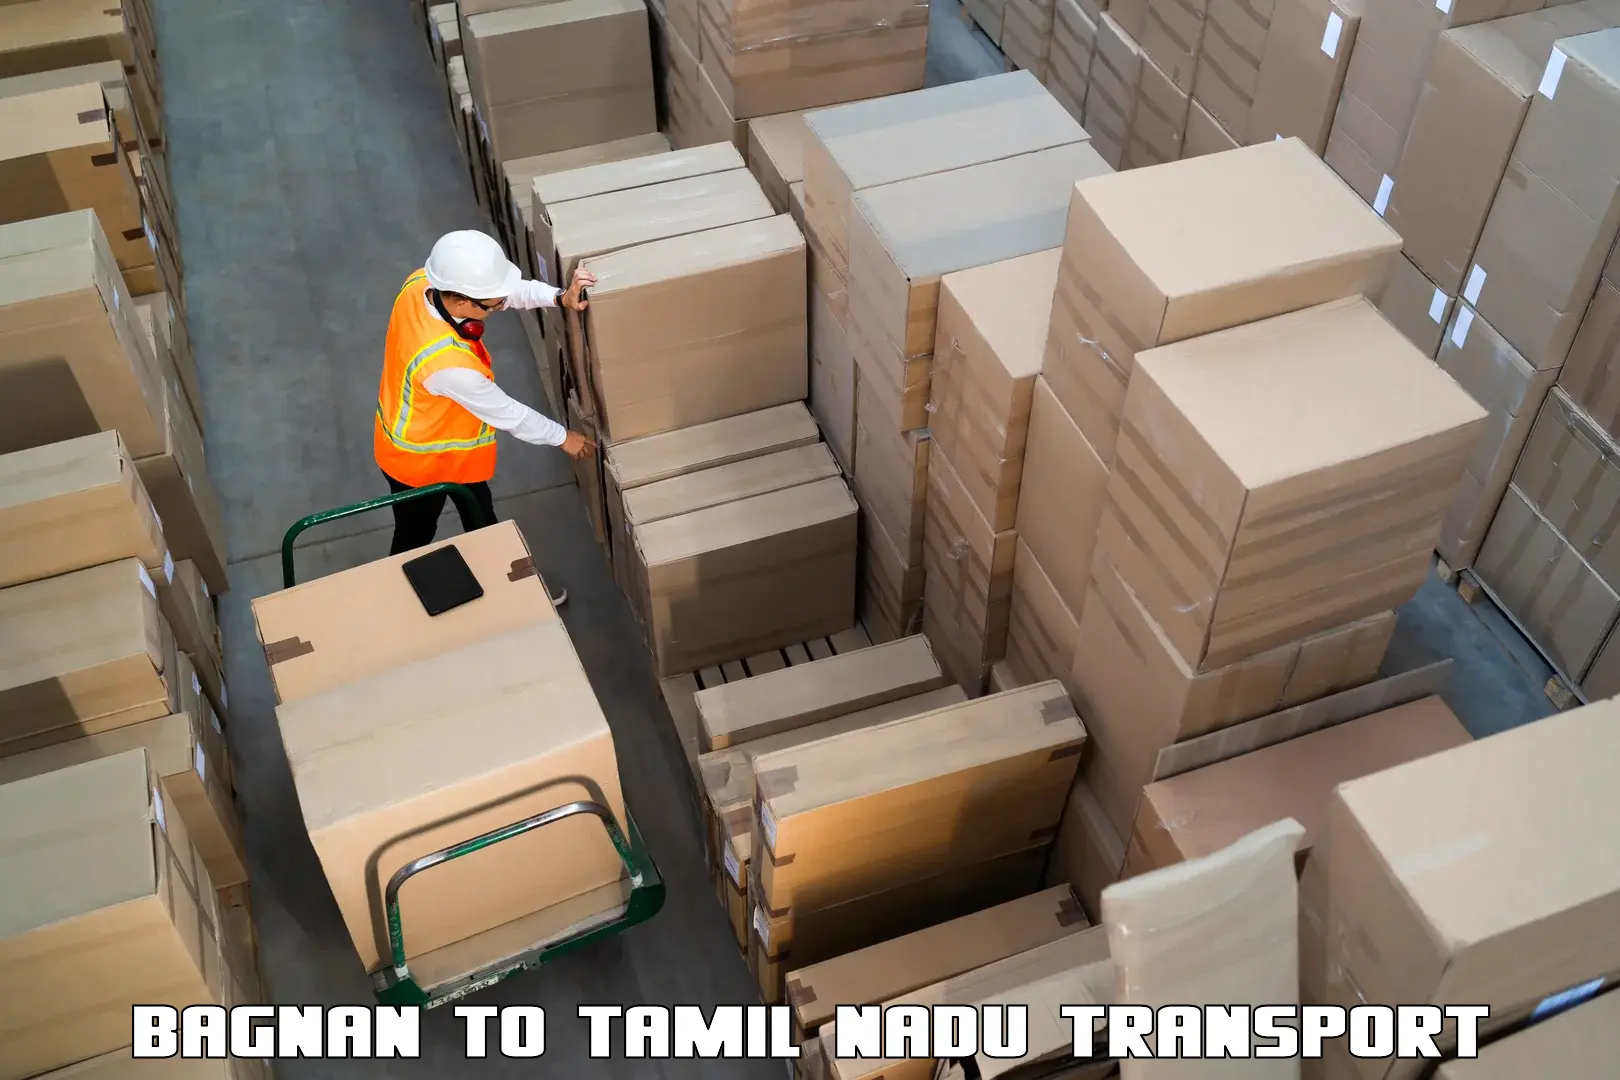 Express transport services Bagnan to Ennore Port Chennai